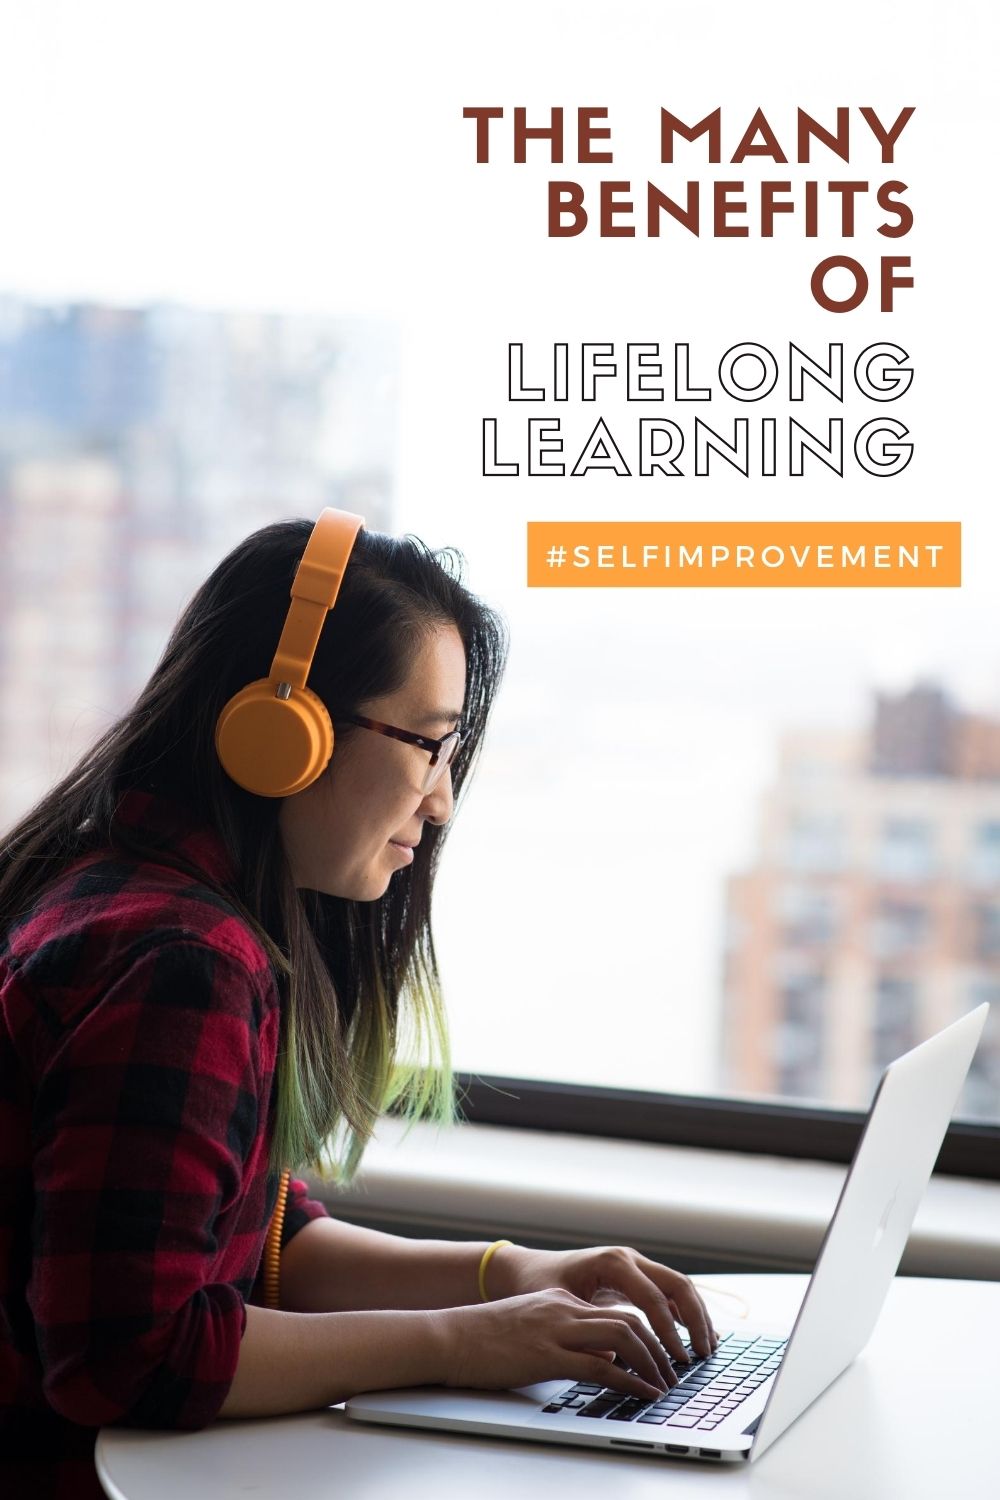 The Many Benefits of Lifelong Learning